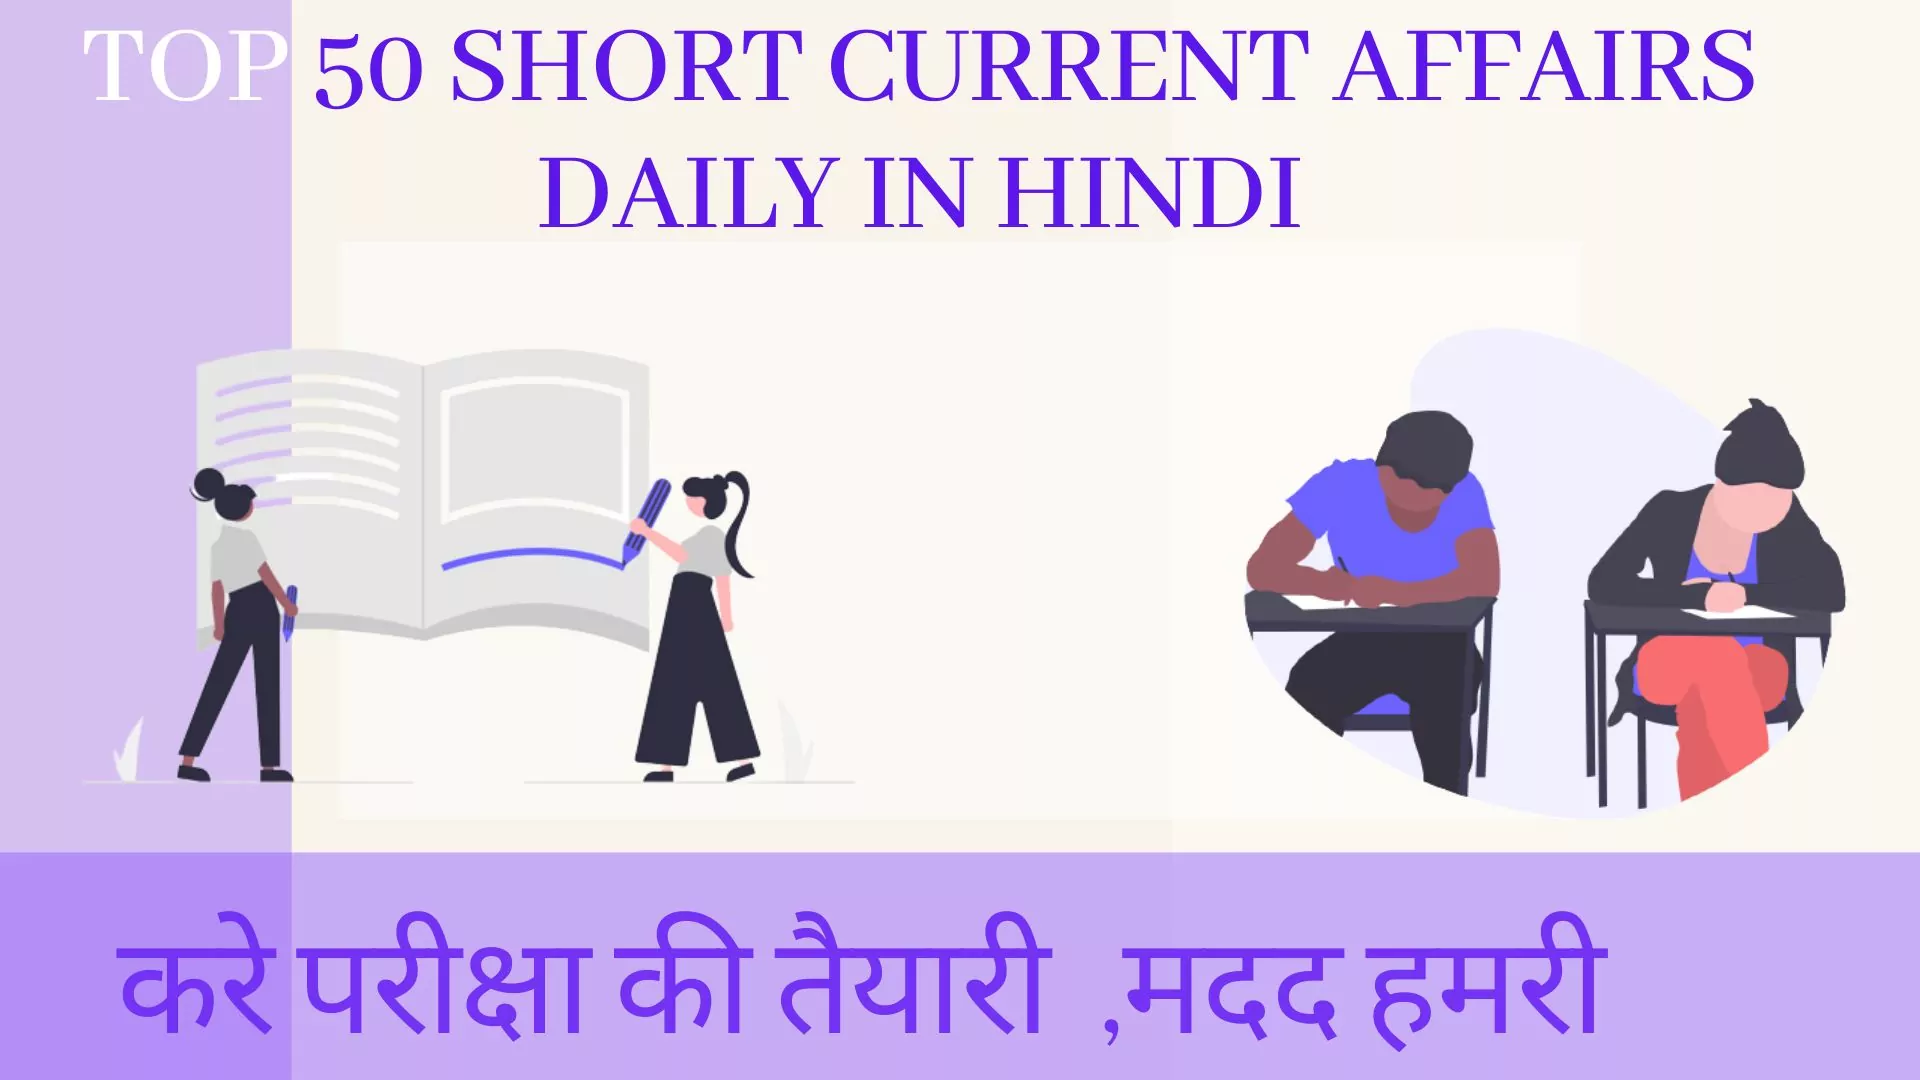 Current affairs daily in hindi